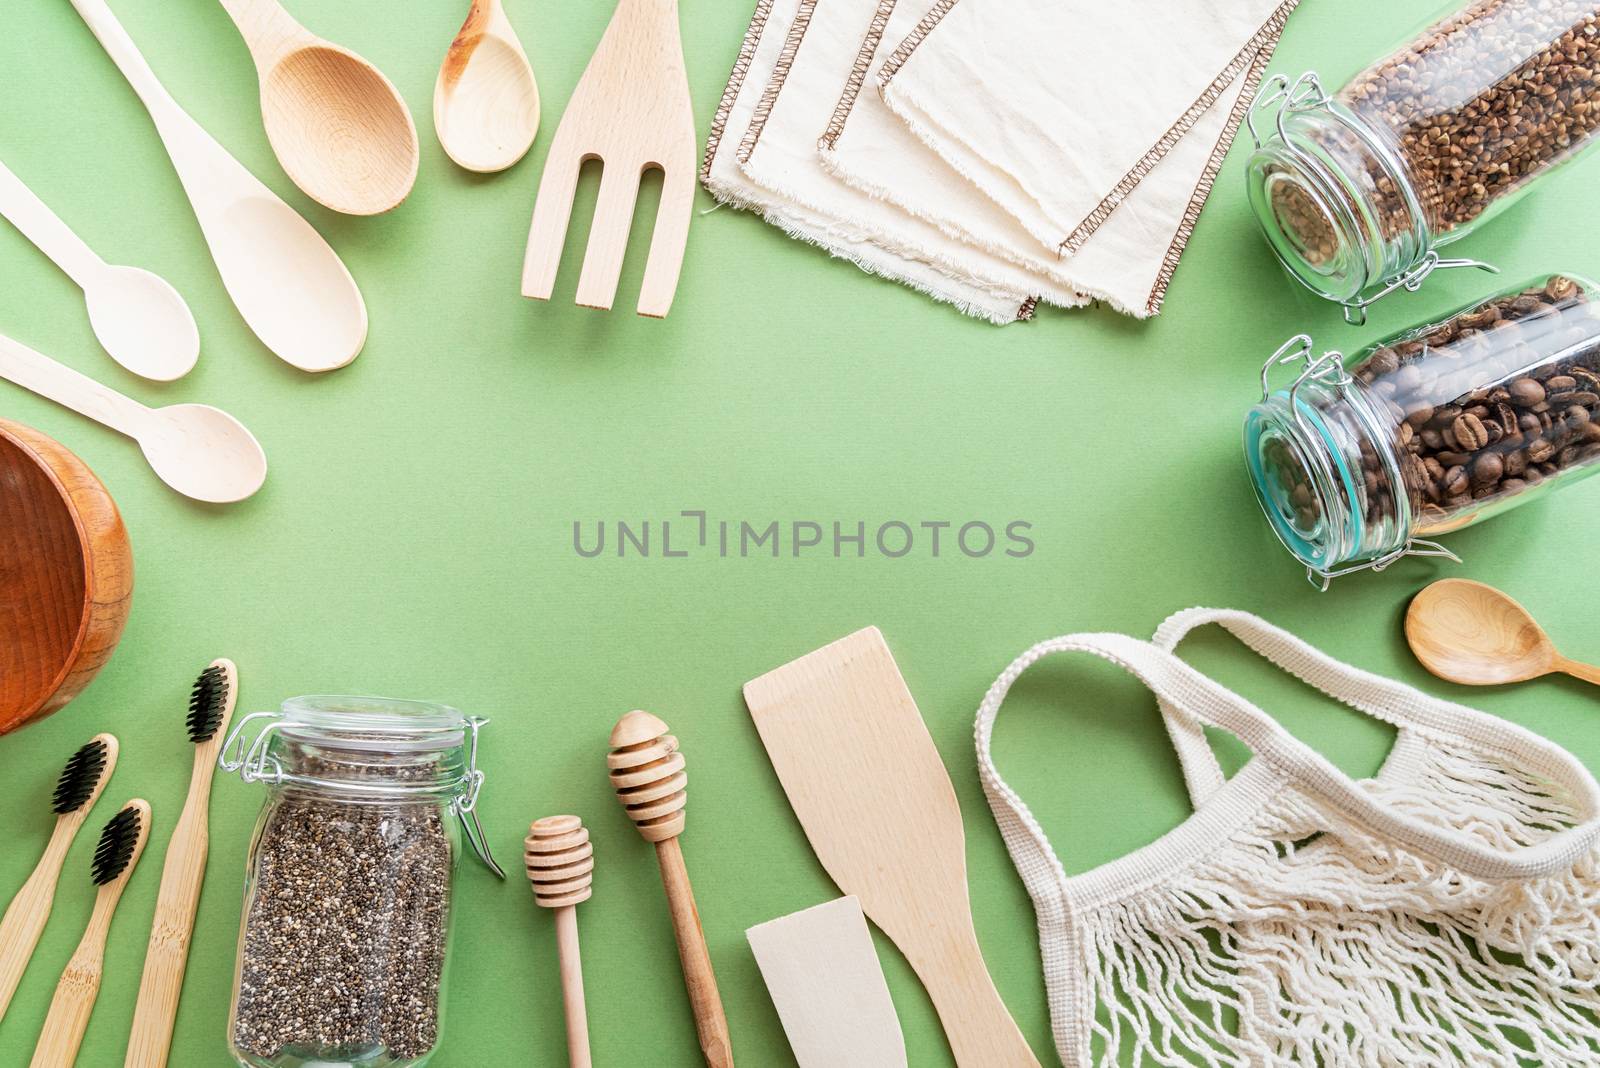 Zero waste eco friendly bag and wooden tools top view on green background by Desperada